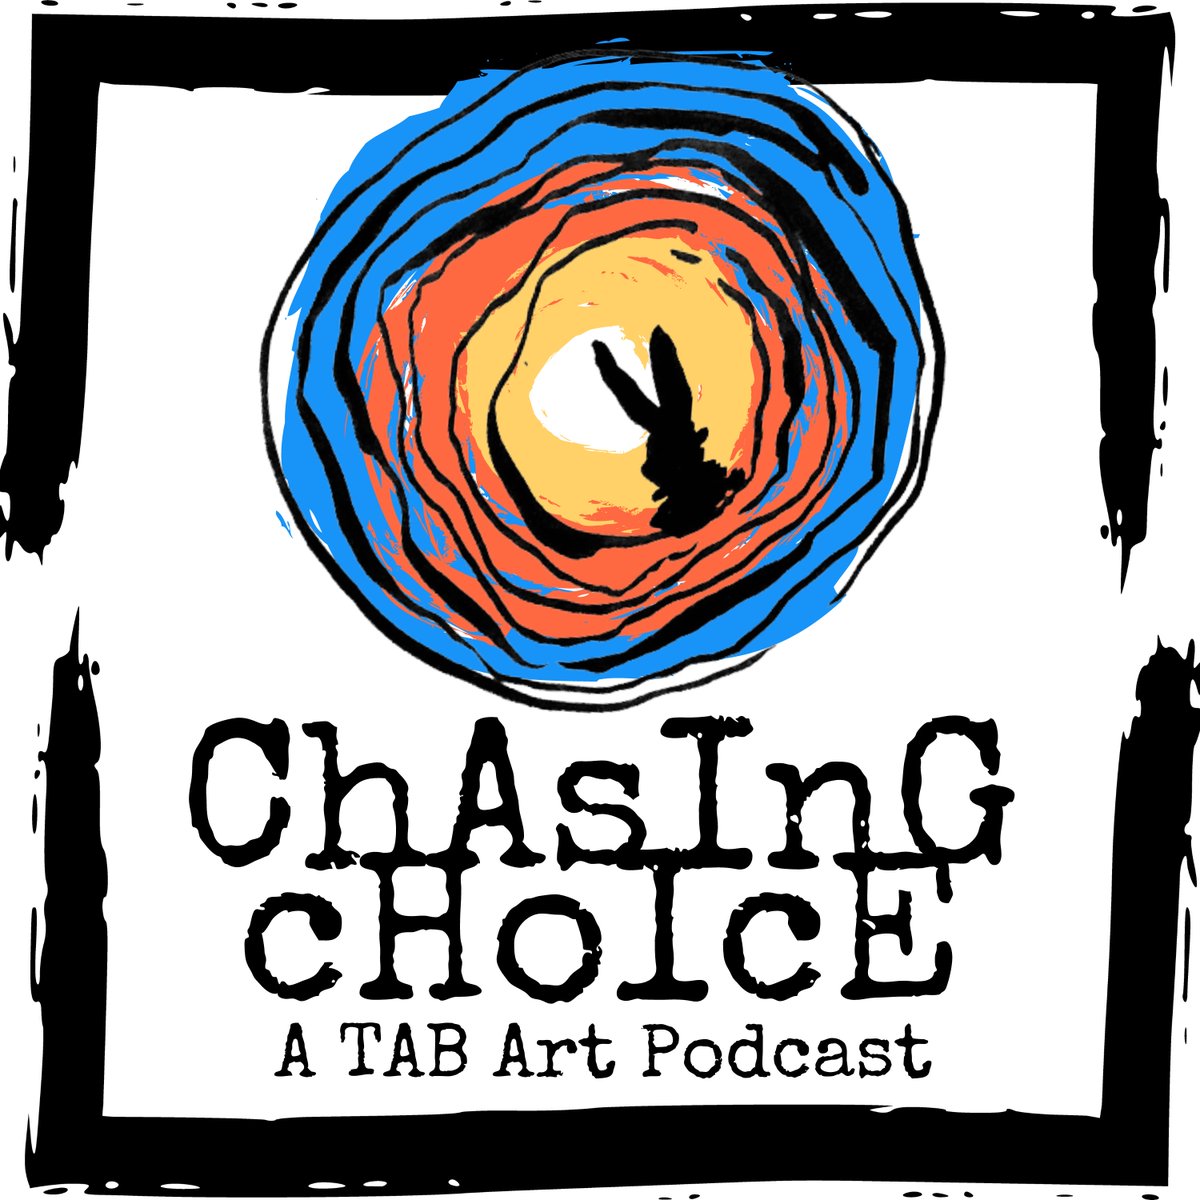 🎙️Curious about TAB & Student-Directed Learning in the Art Studio? Stay tuned for illustrated stories and practical strategies from my own journey & others in Choice-Based Art Education. 🎙️'Chasing Choice: A TAB Art Podcast' is almost here! anchor.fm/s/4ed6e964/pod…